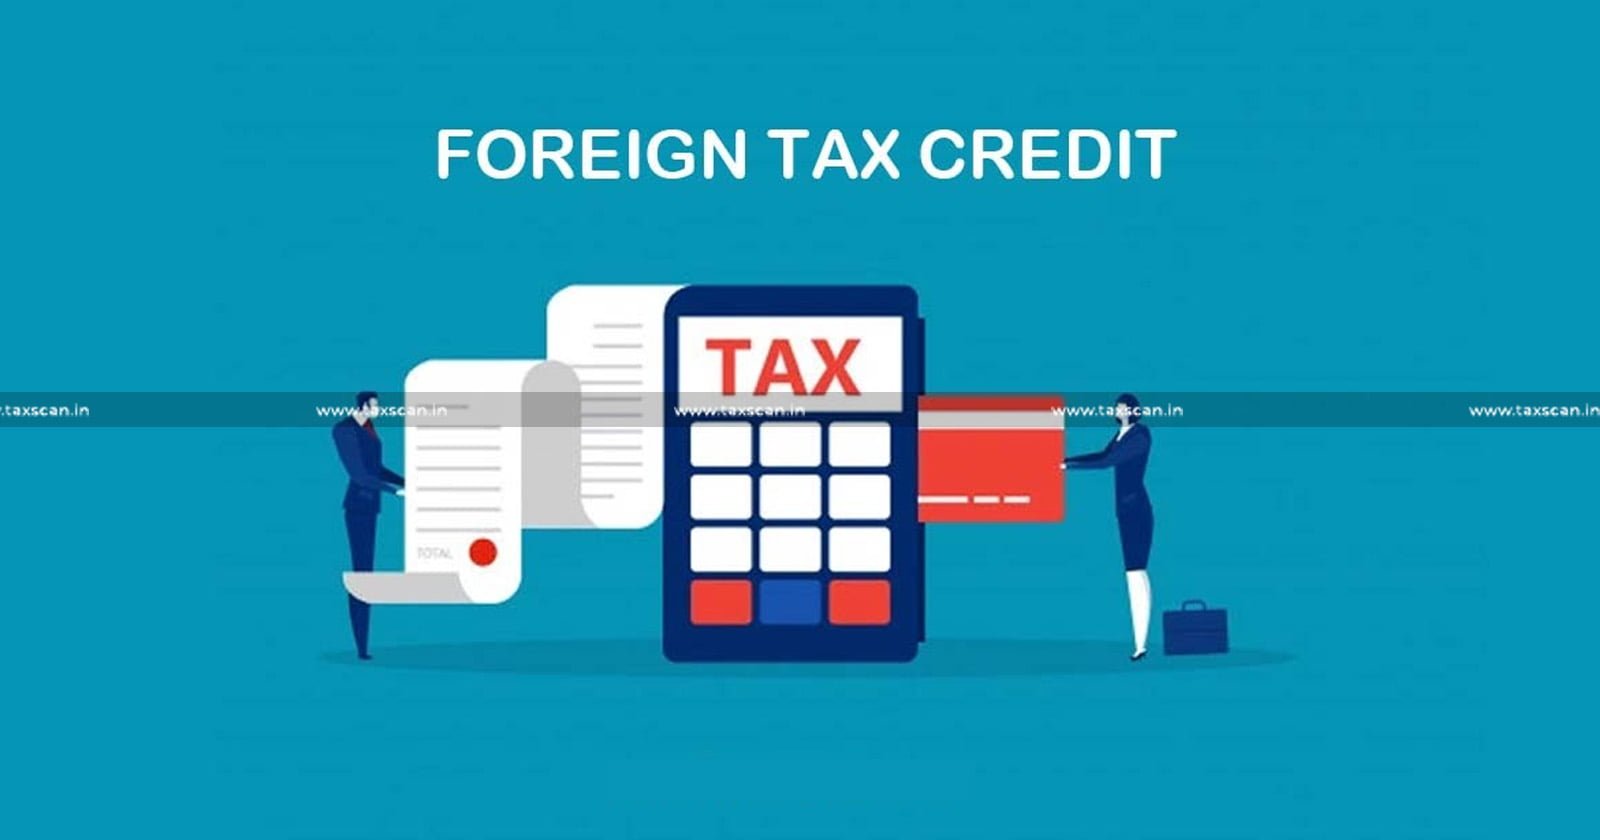 Claim of FTC - FTC - Claim of FTC on Payment - Payment of Foreign Tax - due to Late Filing of ROI - Late Filing of ROI - ROI - ITAT - Income Tax - ITAT directs re-adjudication - taxscan